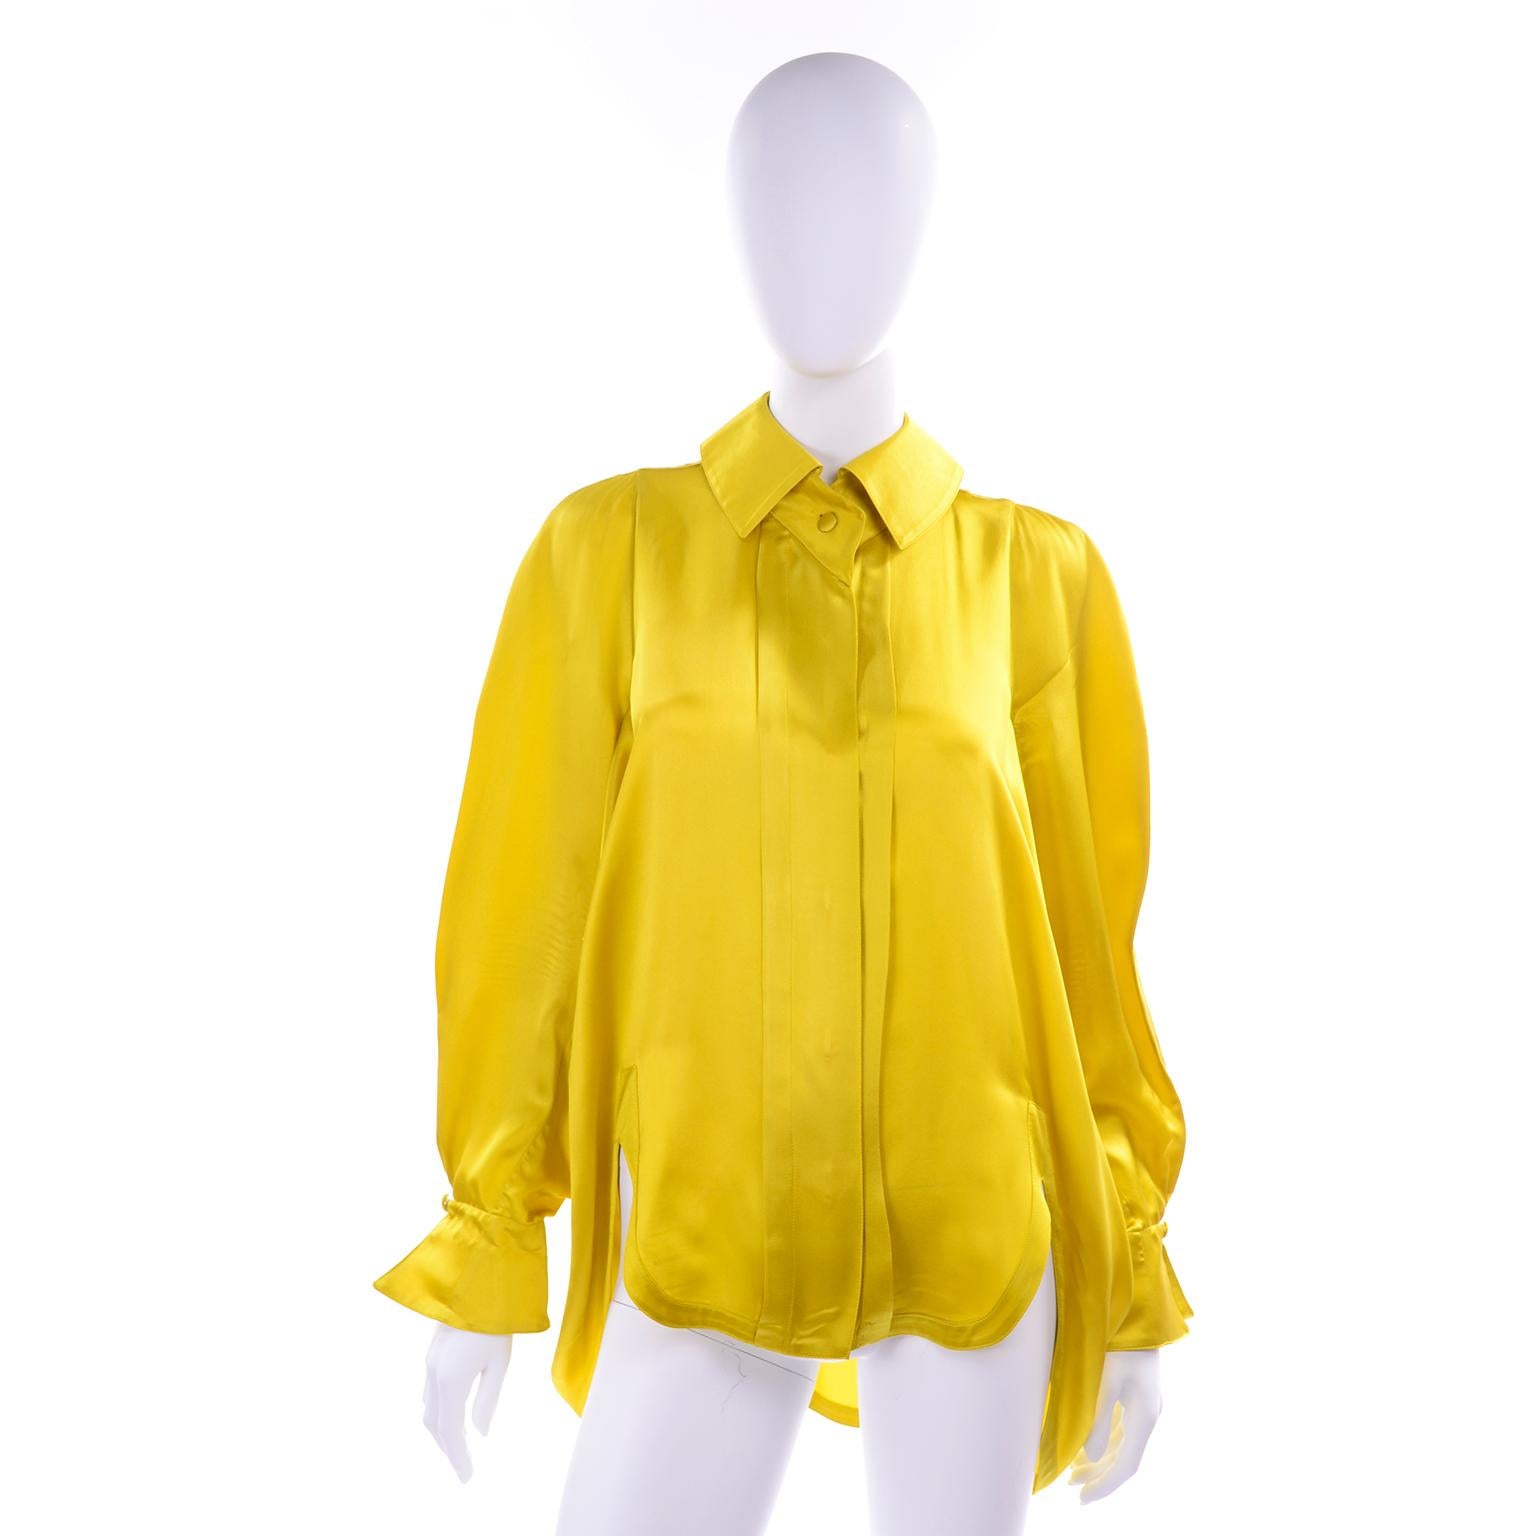 We love unique blouses and this blousy vintage chartreuse silk blouse from Claude Montana is sensational! The photos don't really show how amazing this top is. Long sleeves with pointed french style split cuffs with a decorative fabric covered